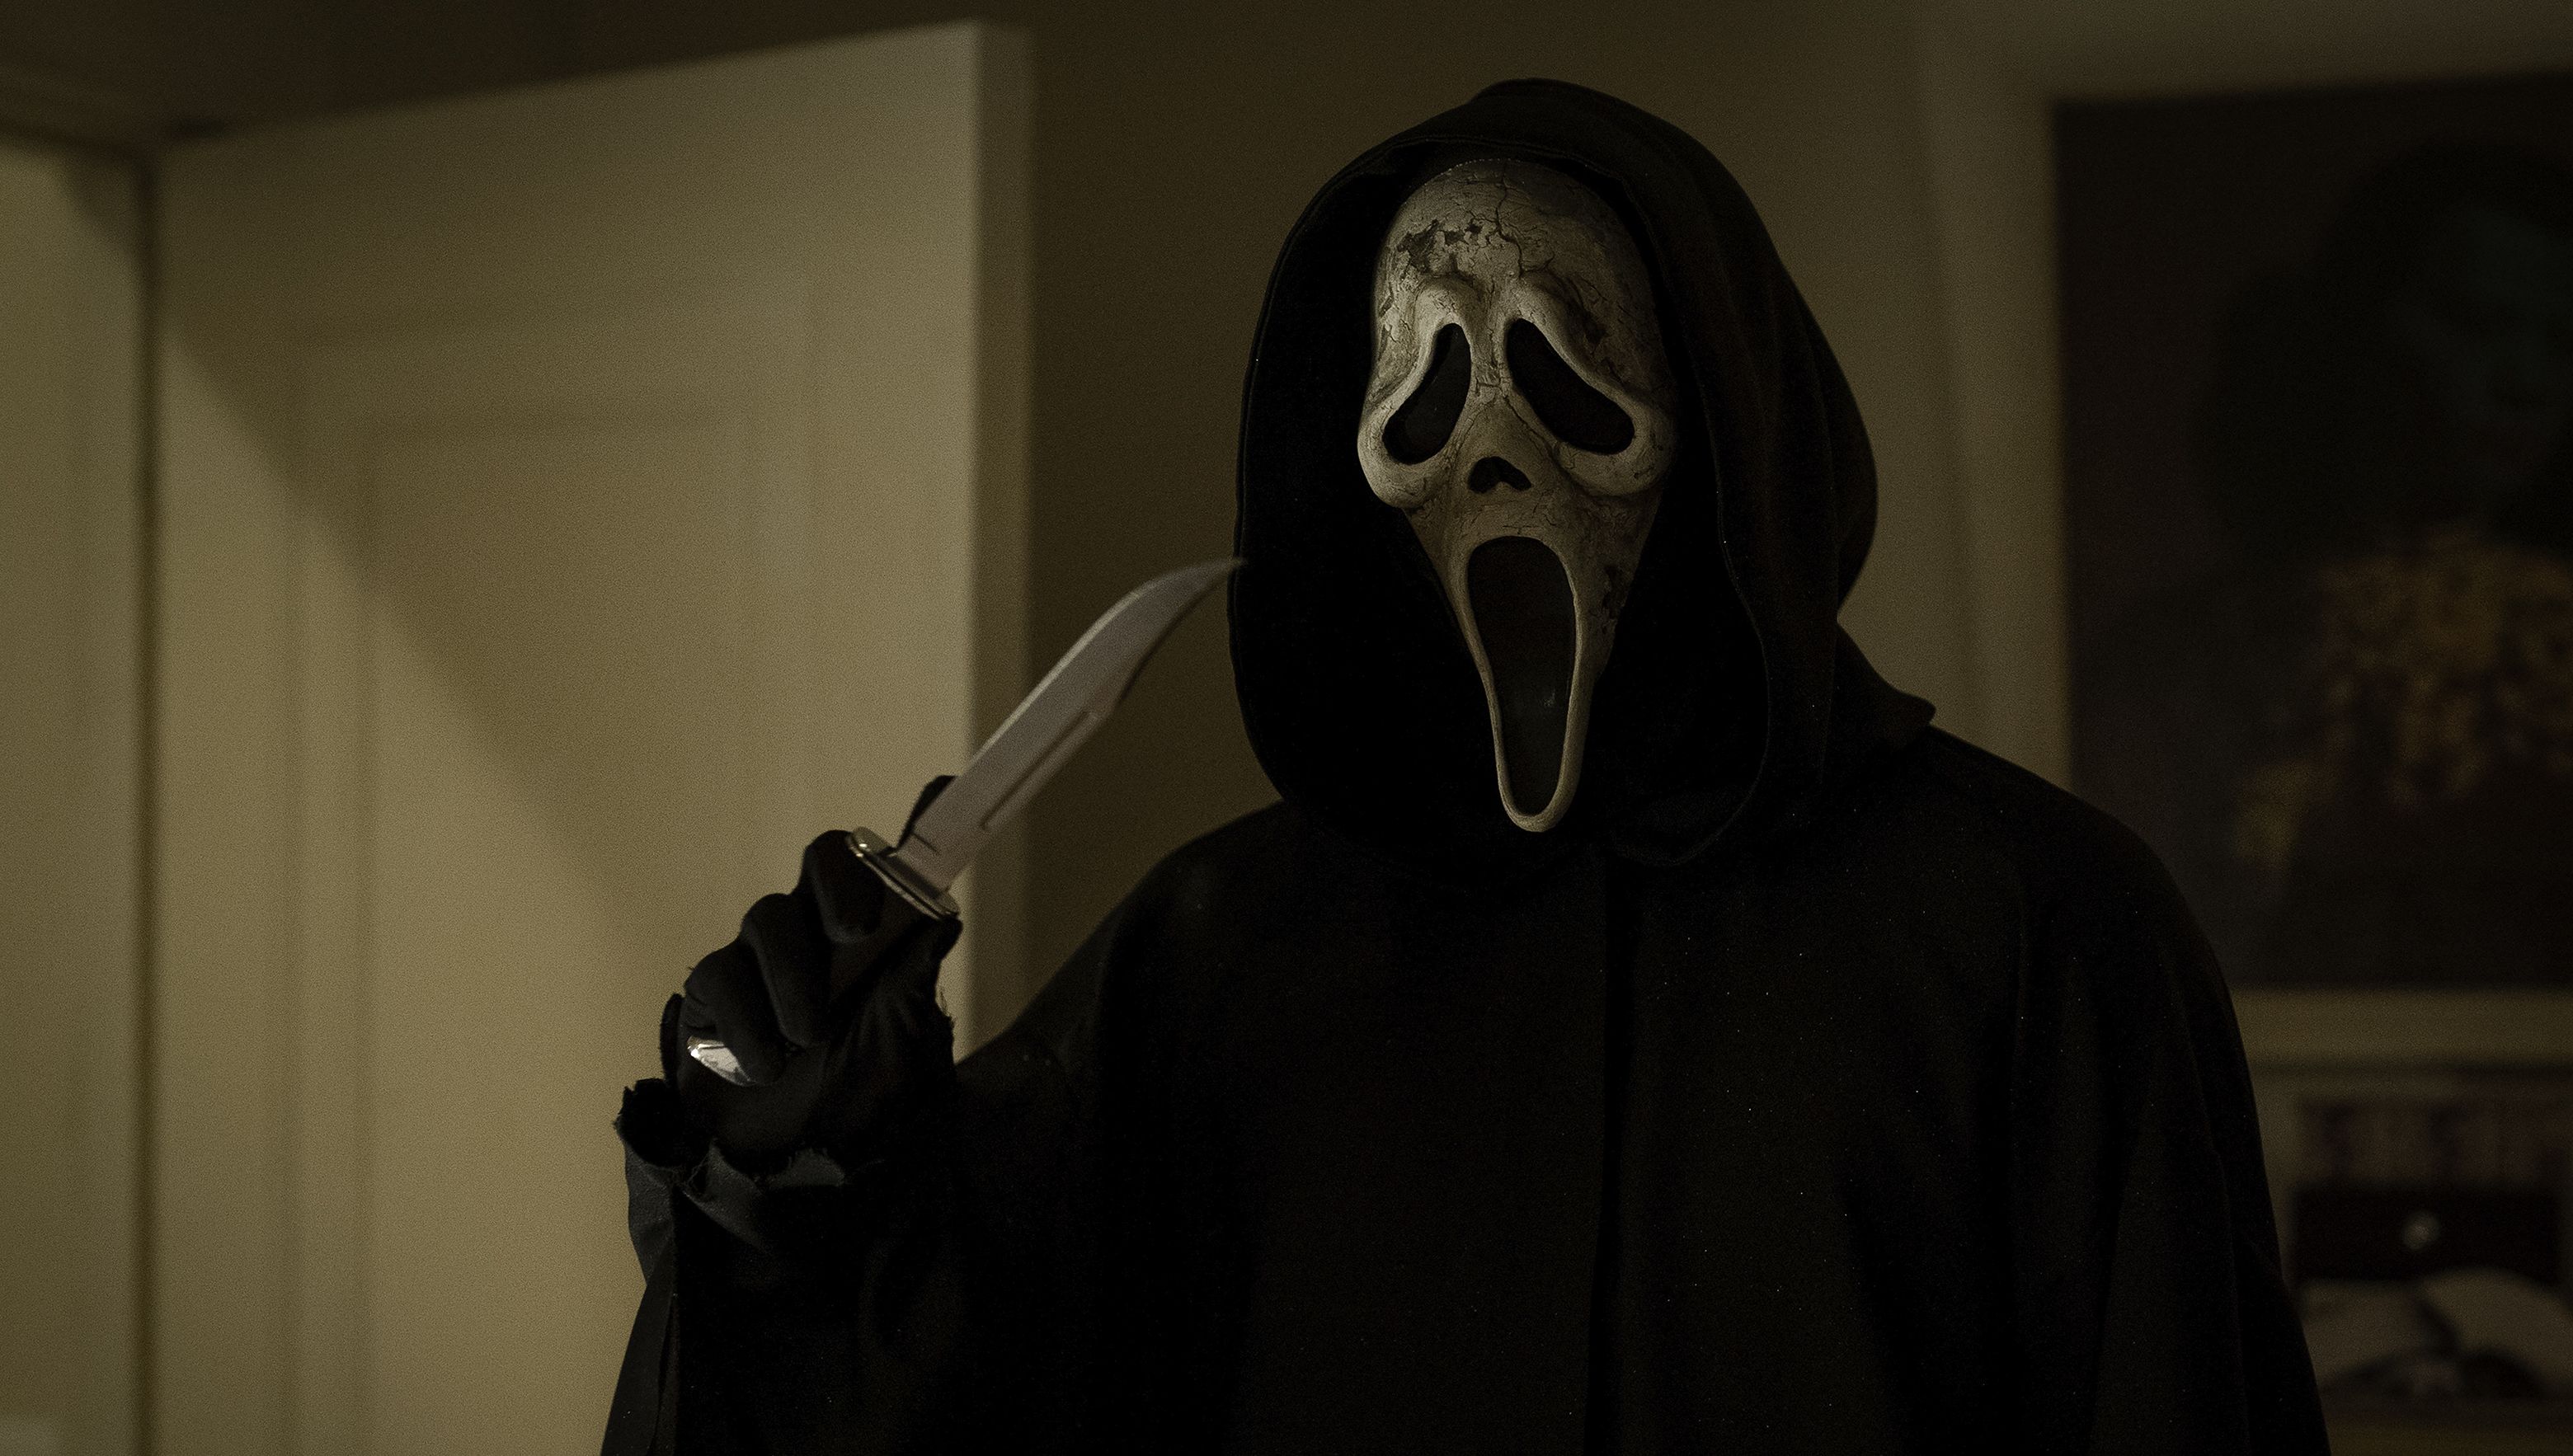 When do you think the series should end? I think Scream 8 would be